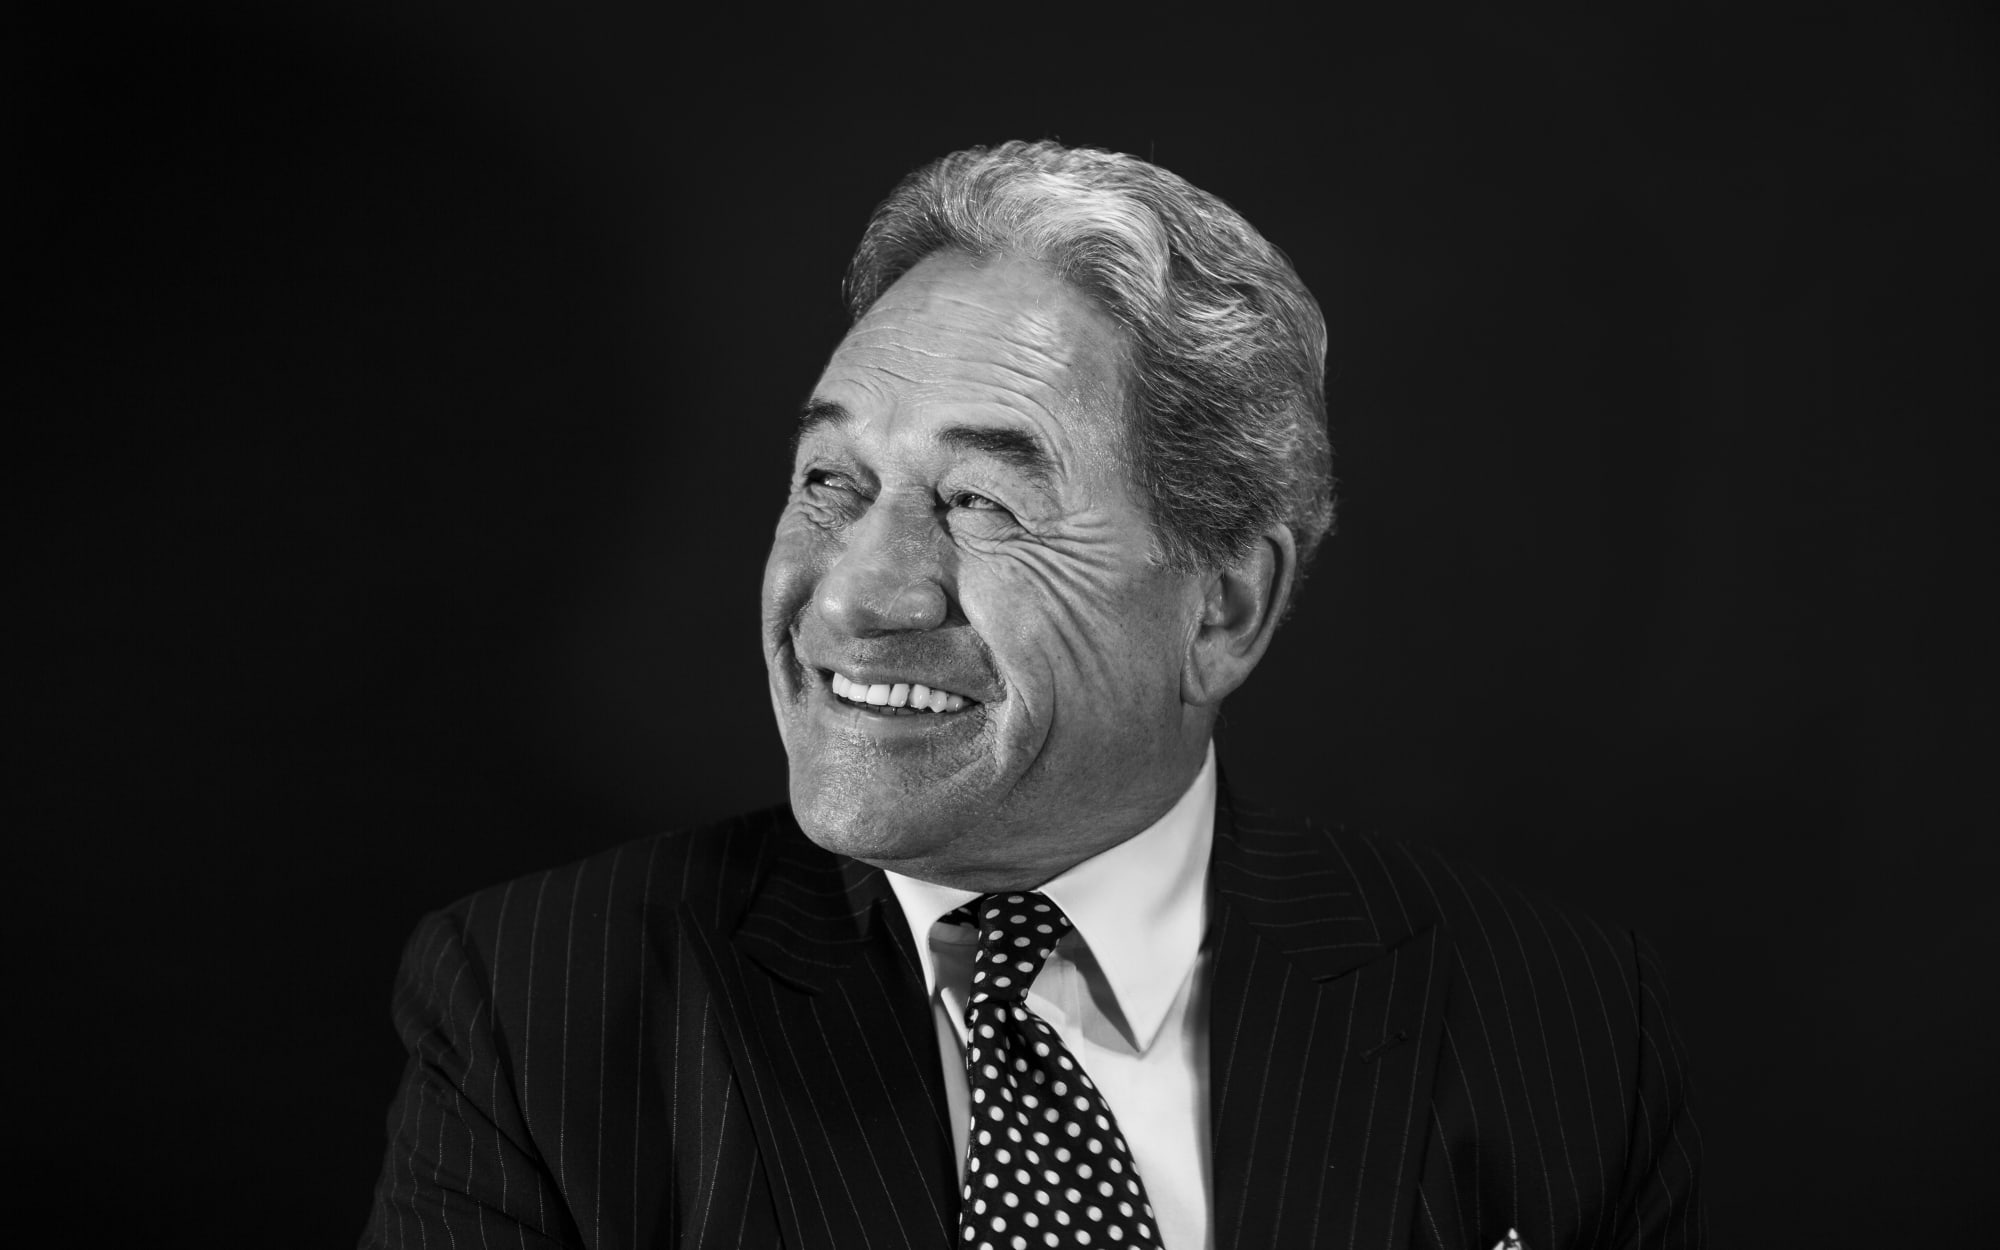 Winston Peters photographed in his office at Bowen House in the lead up to the 2017 election.